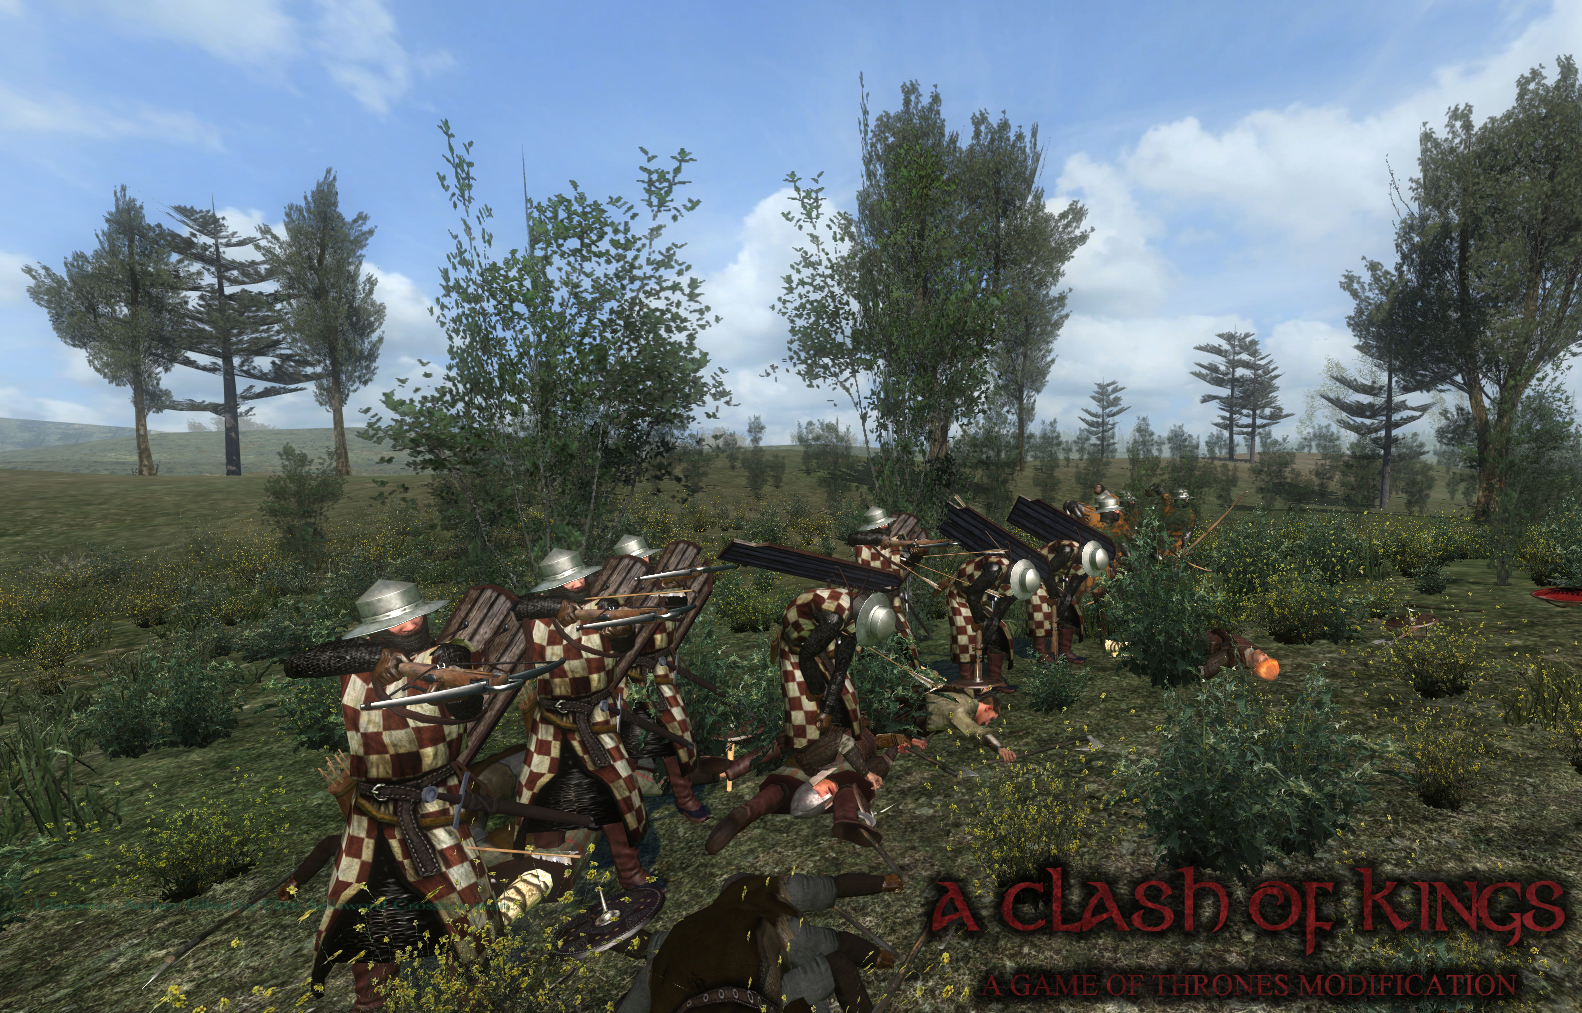 mount and blade game of thrones mod download